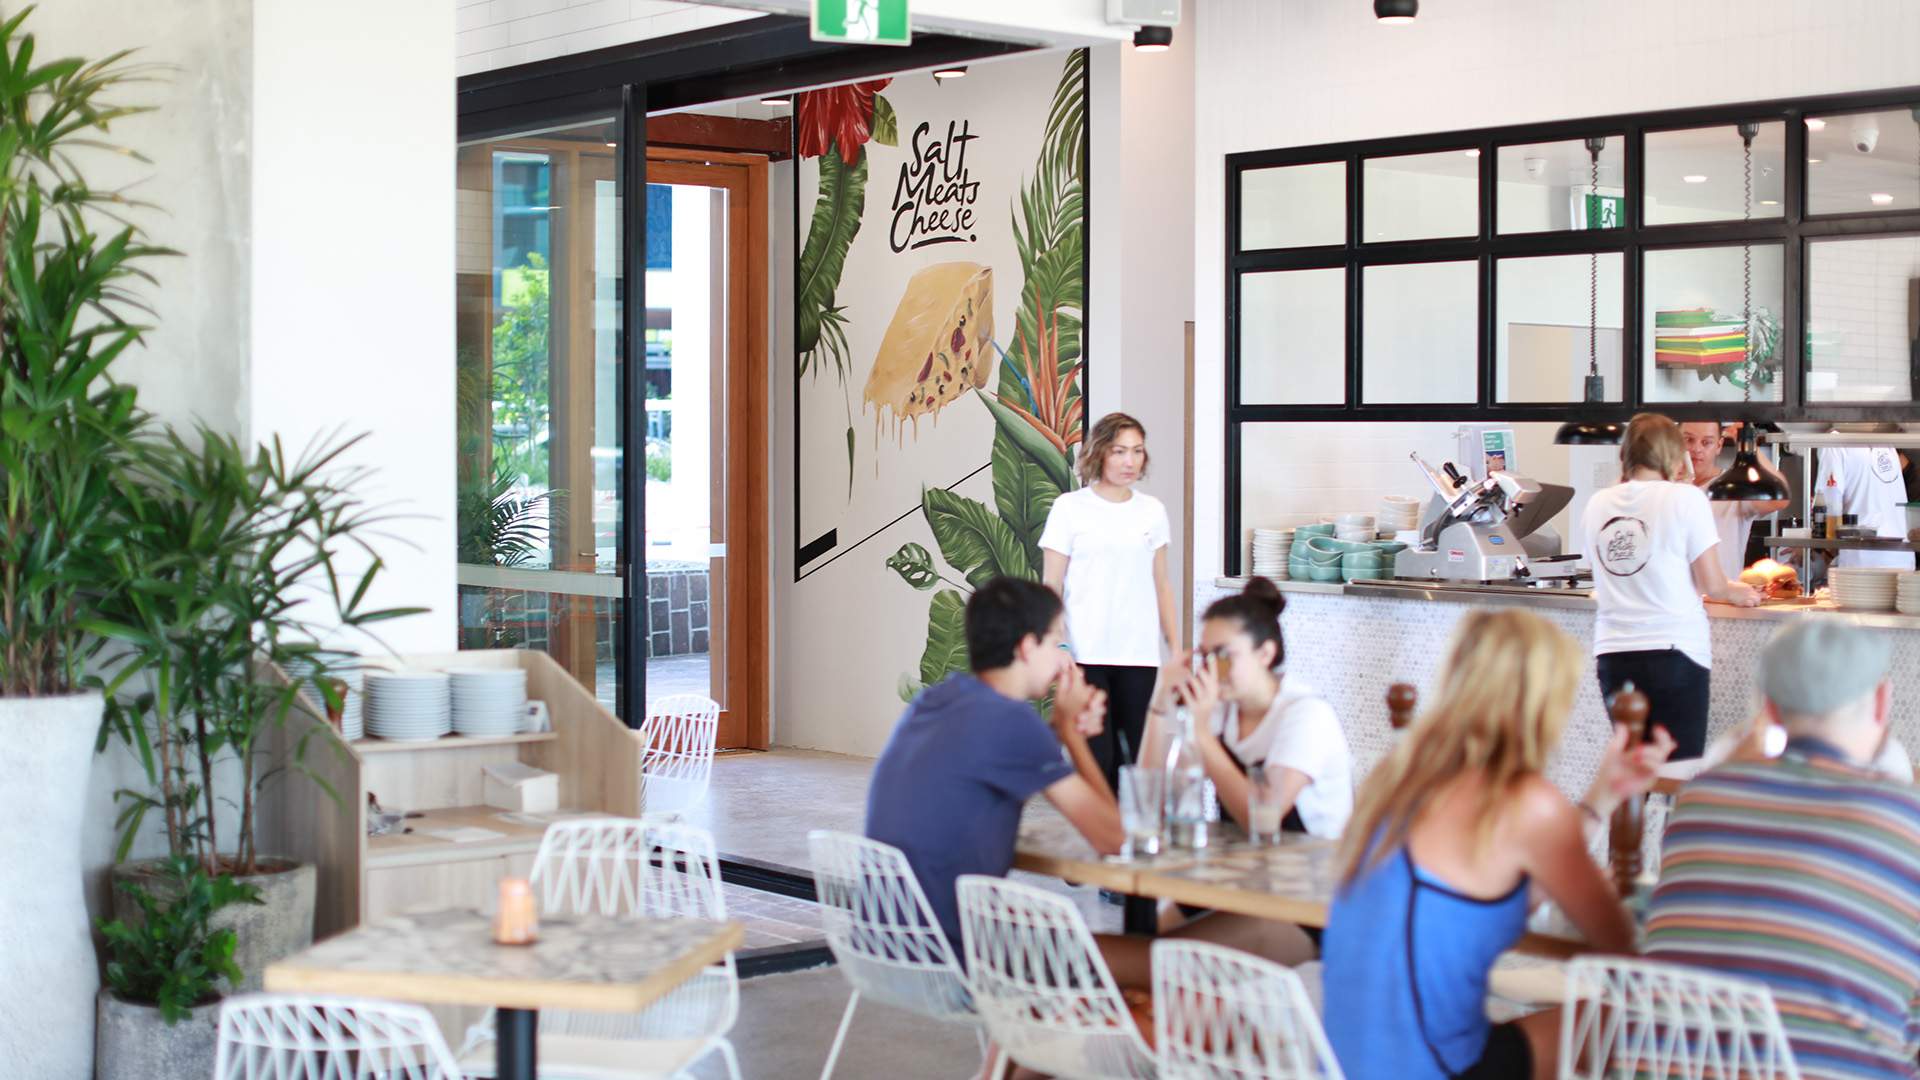 Sydney's Salt Meats Cheese Has Opened Its First Brisbane Store